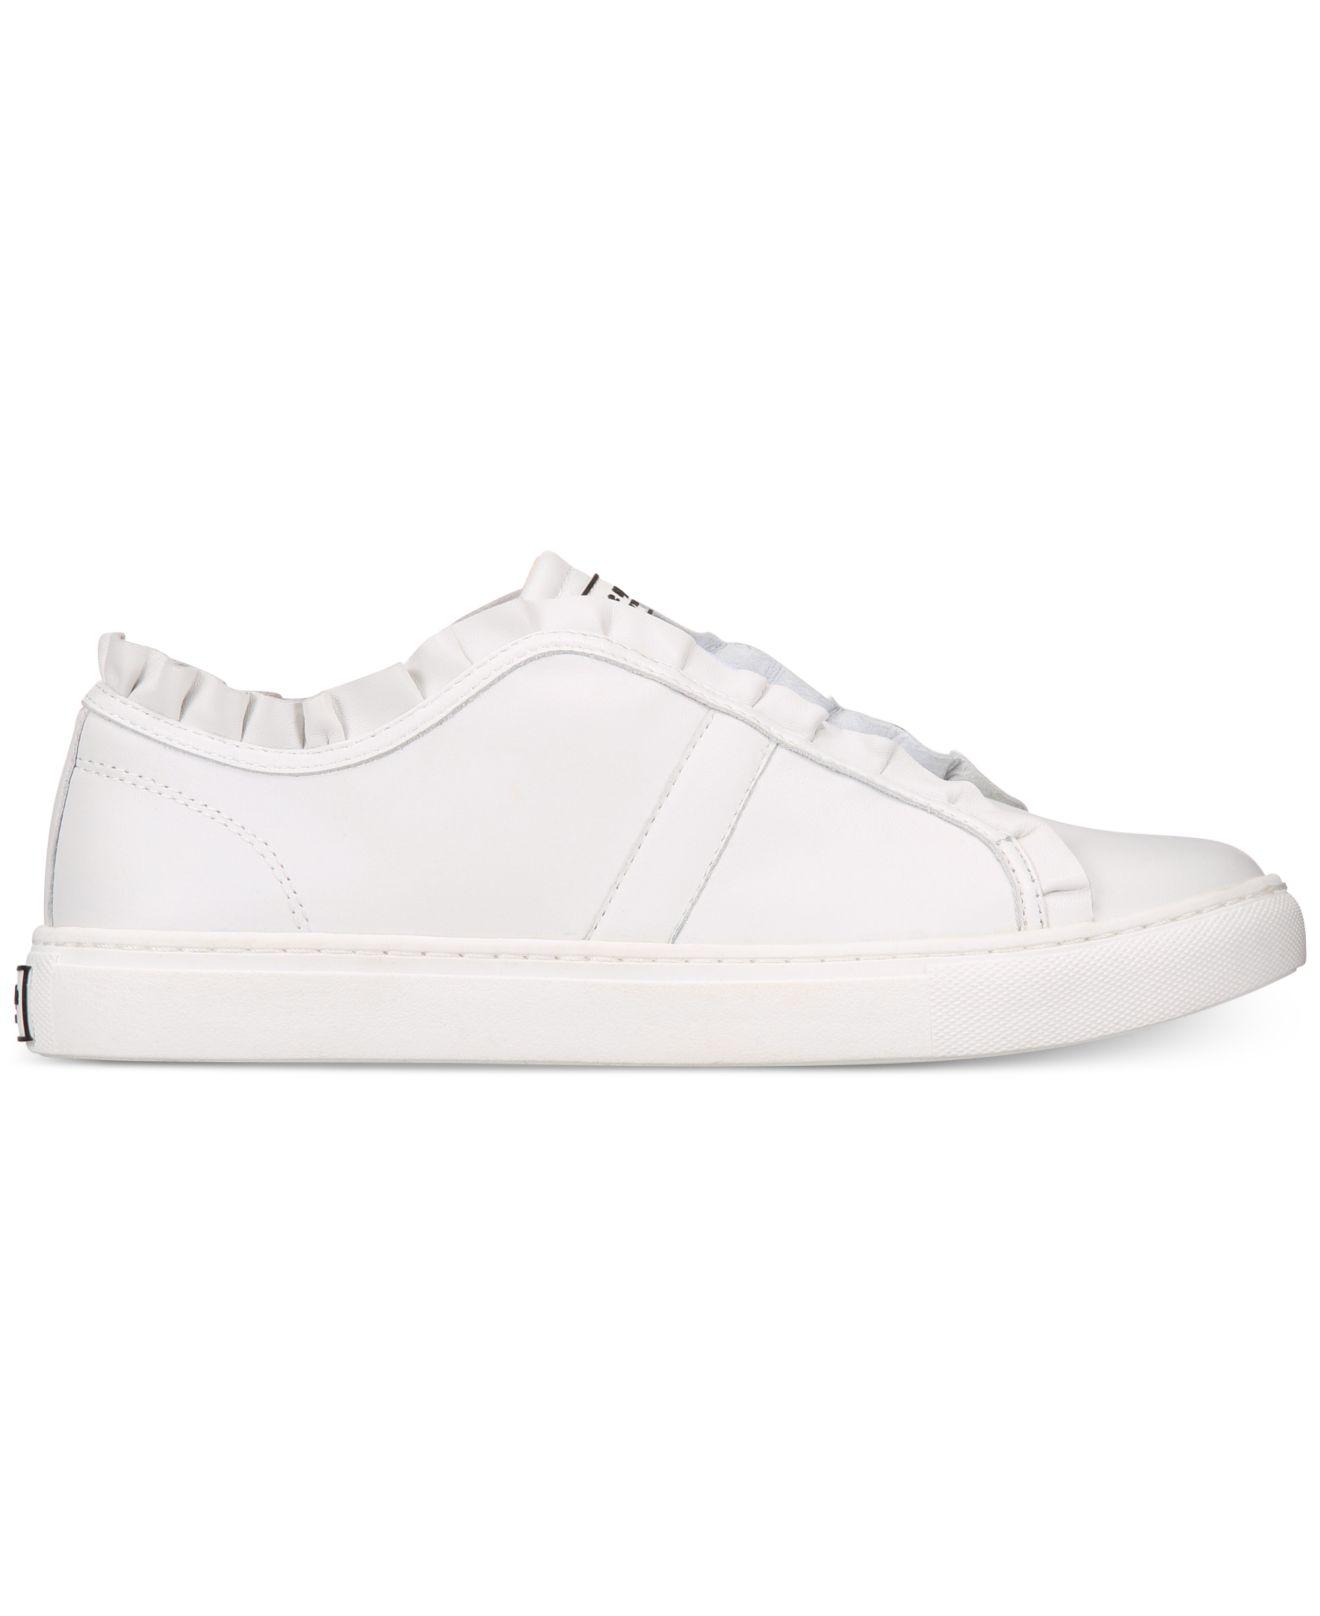 Kate Spade Leather Lance Sneakers in White - Lyst